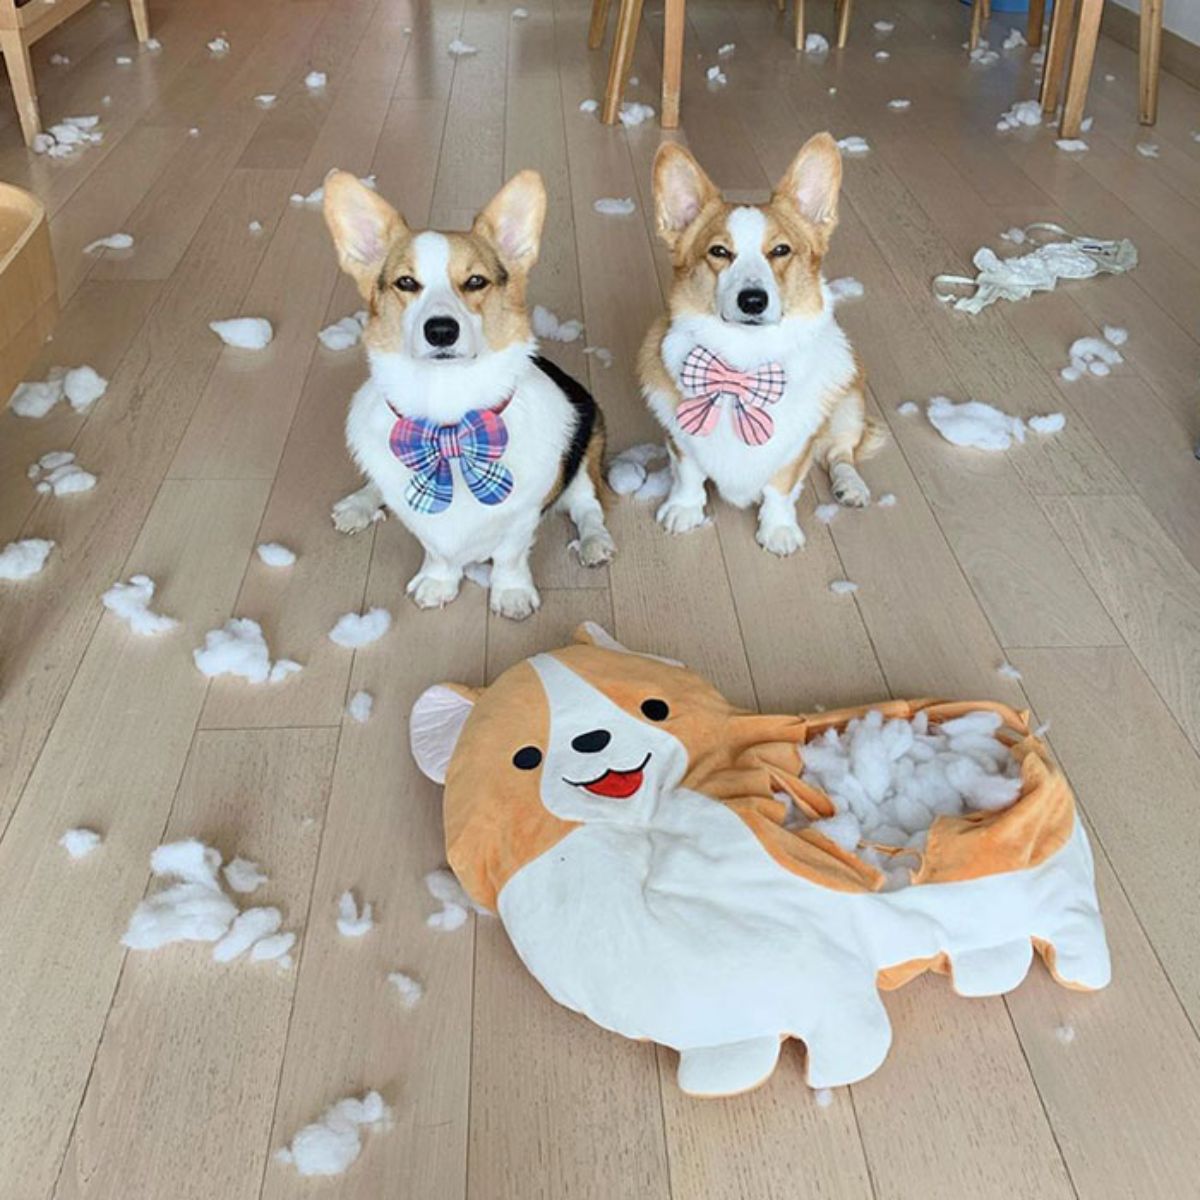 1 black brown and white corgi and 1 brown and white corgi with bowties sitting with an orange and white corgi stuffed toy ripped